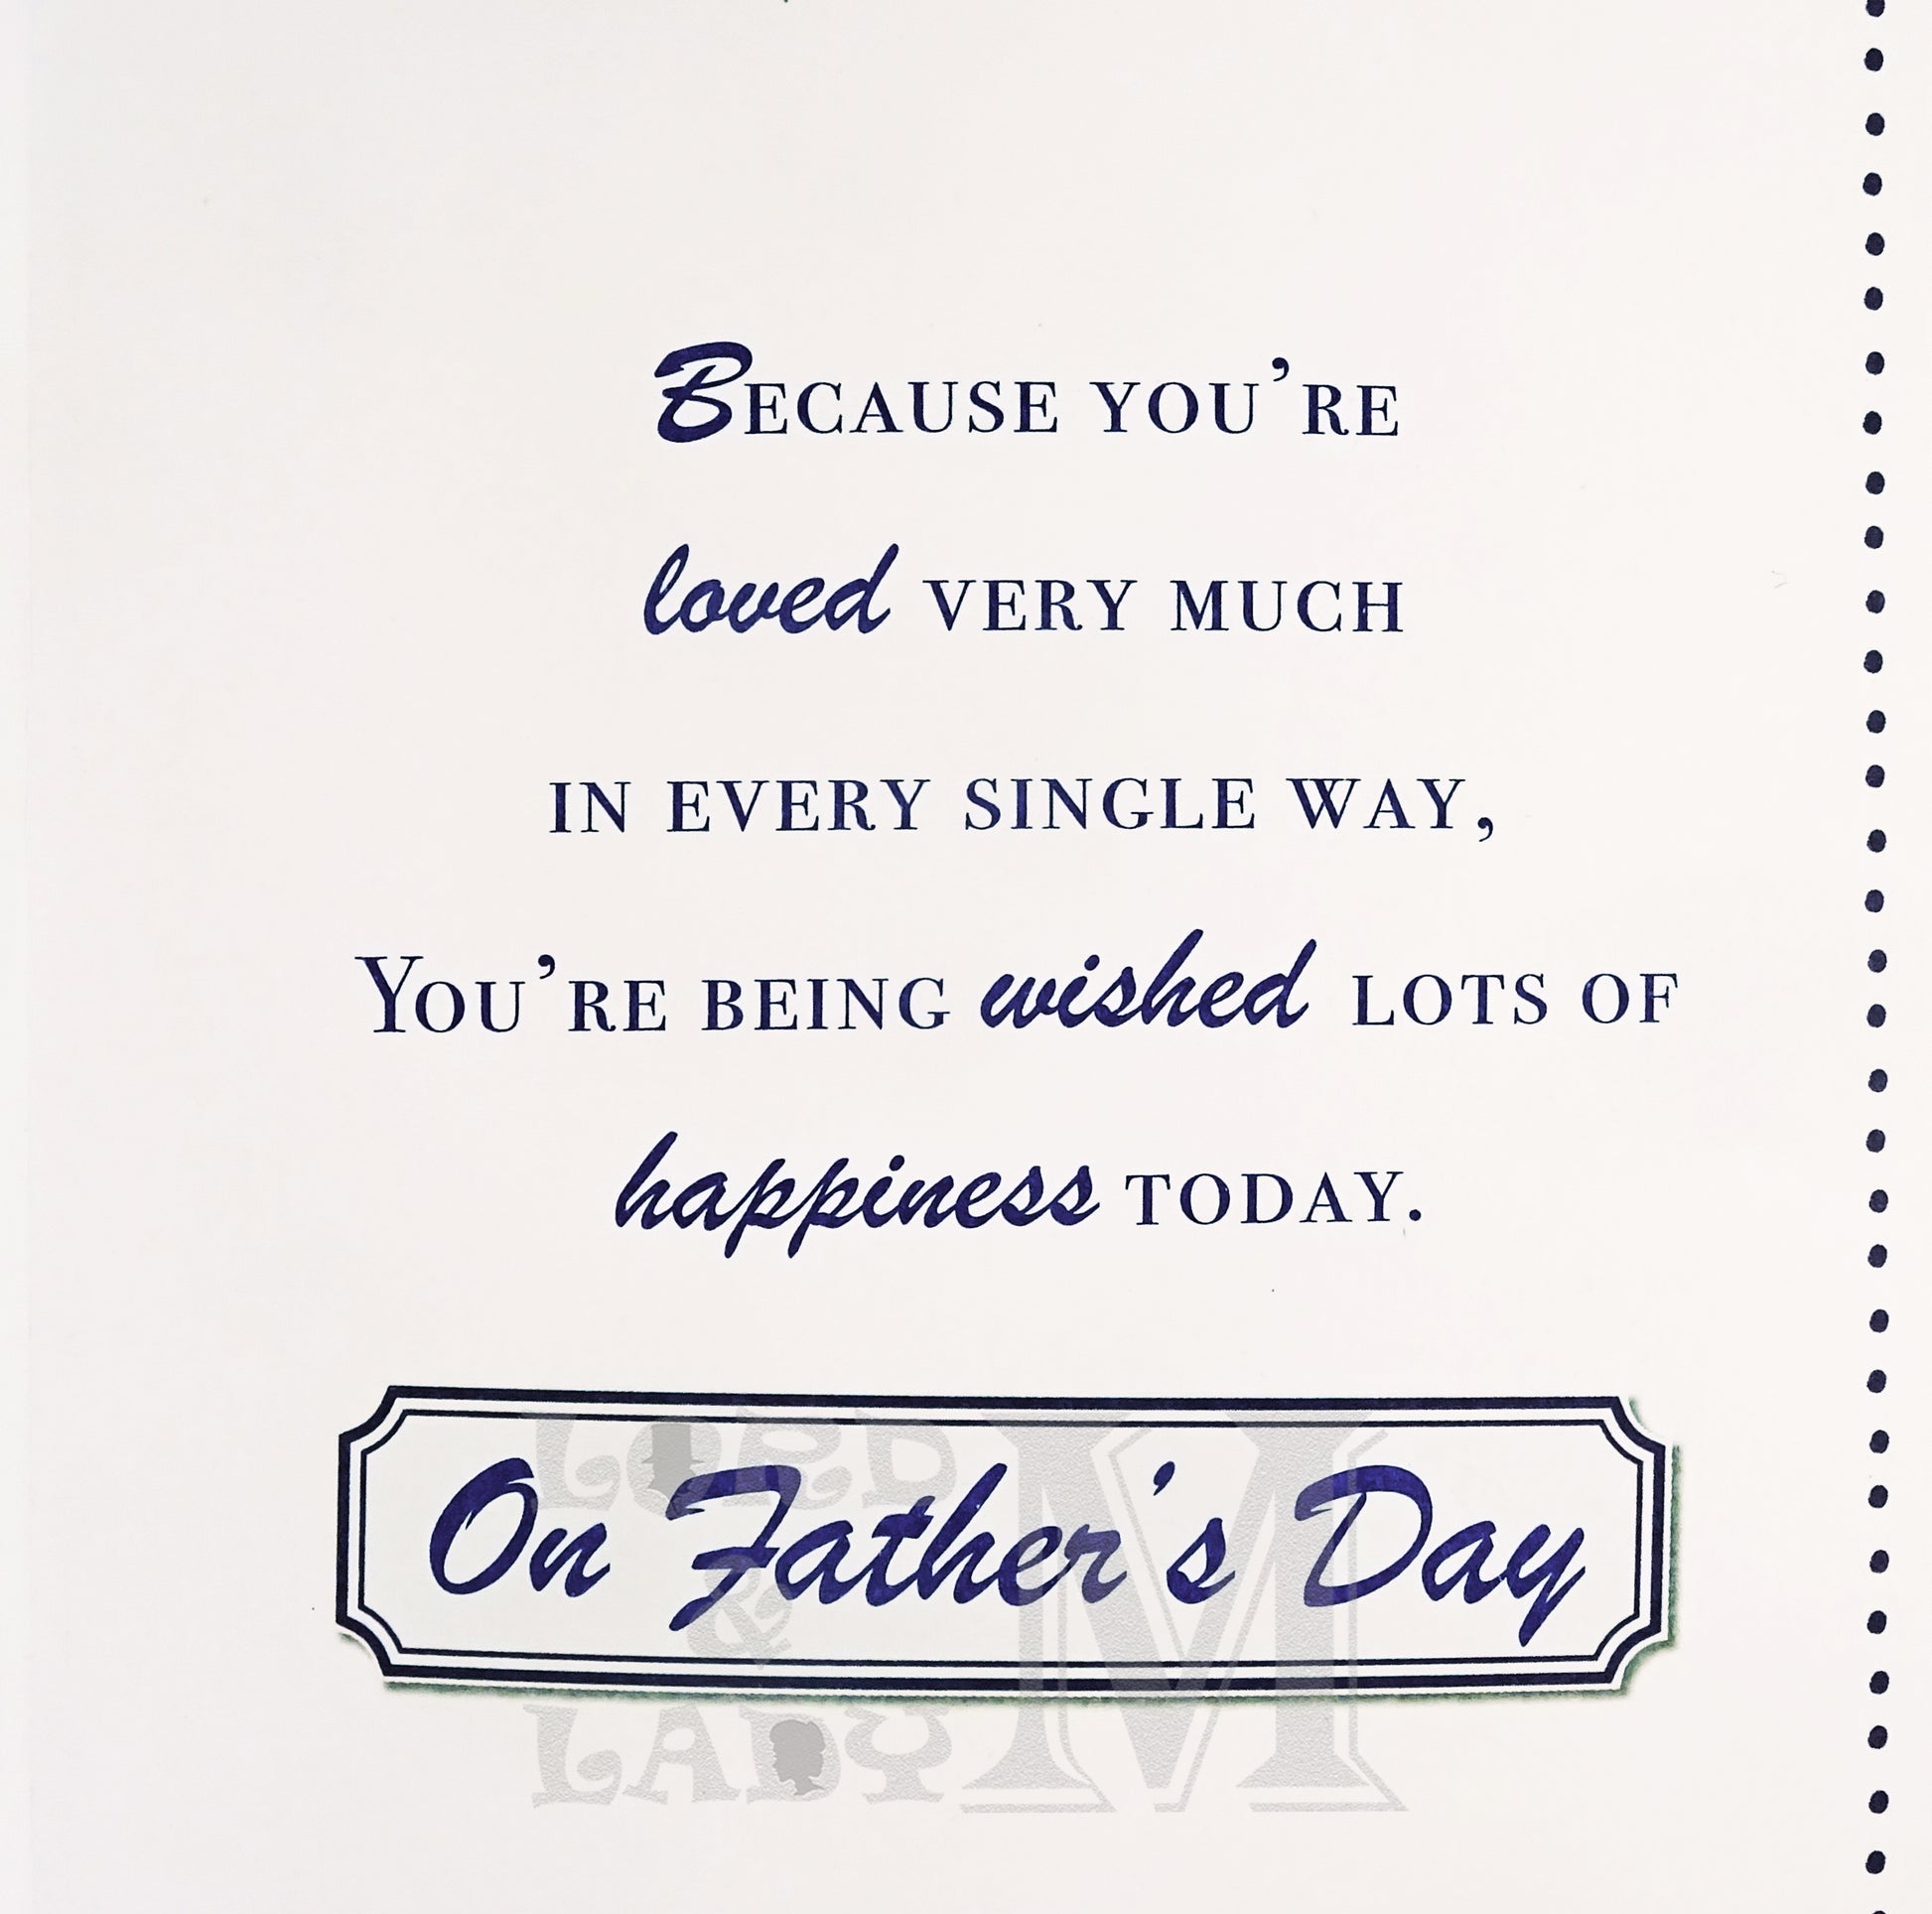 23cm - On Father's Day Great-Grandad - Lge Let -BG